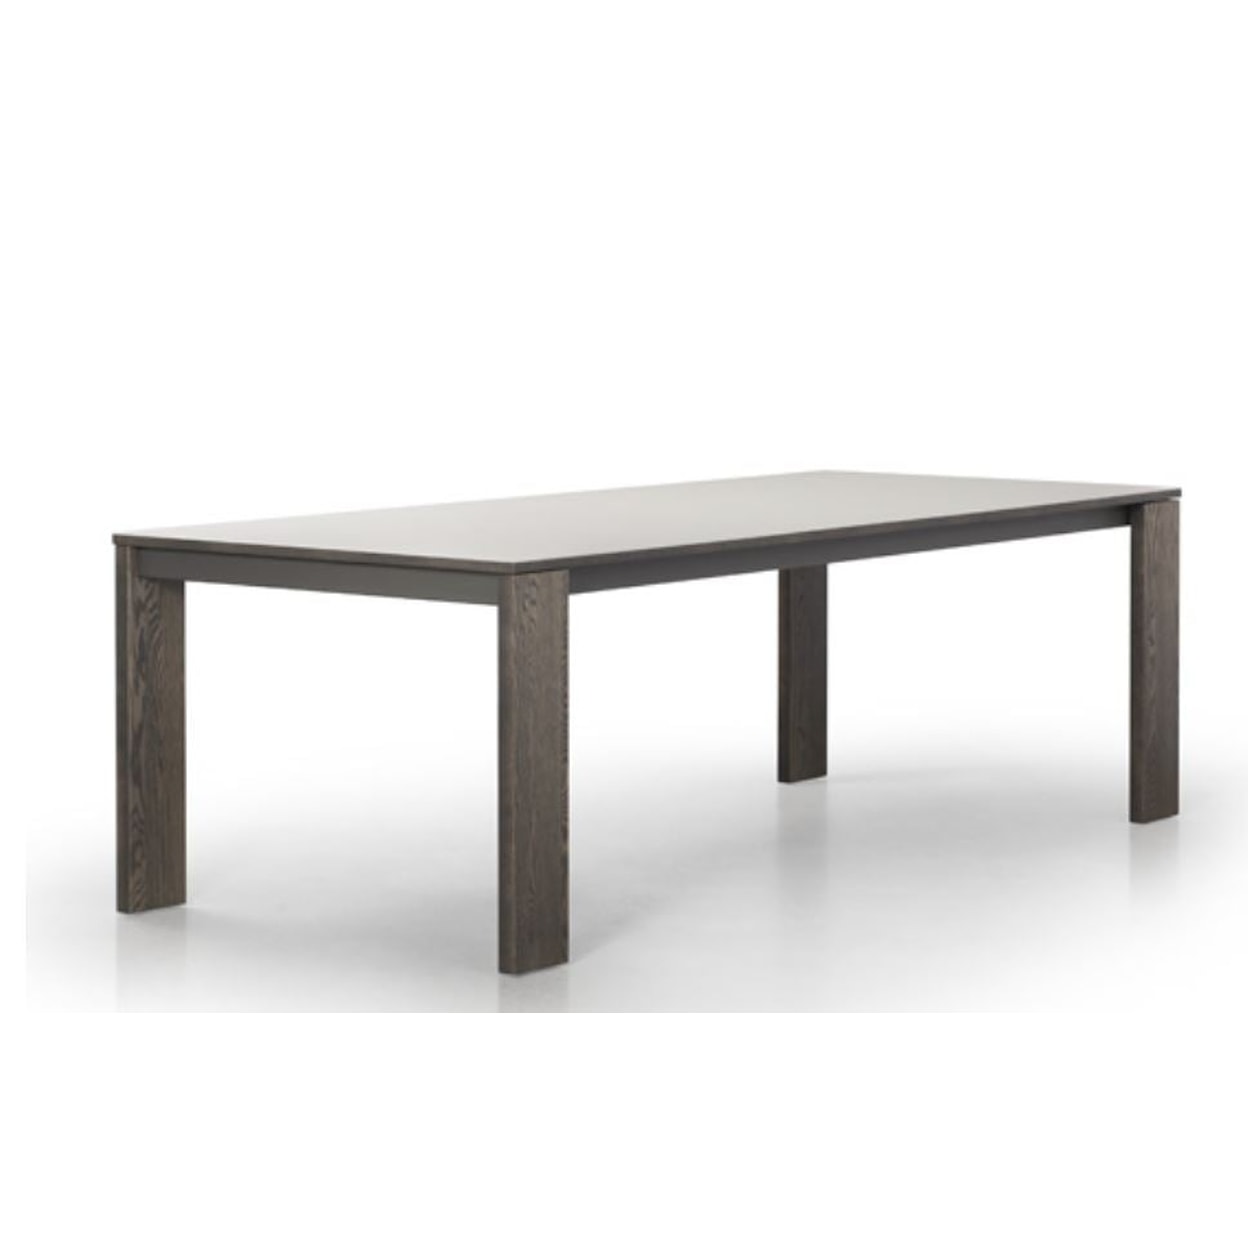 Trica EMPIRE Extendable Dining Table